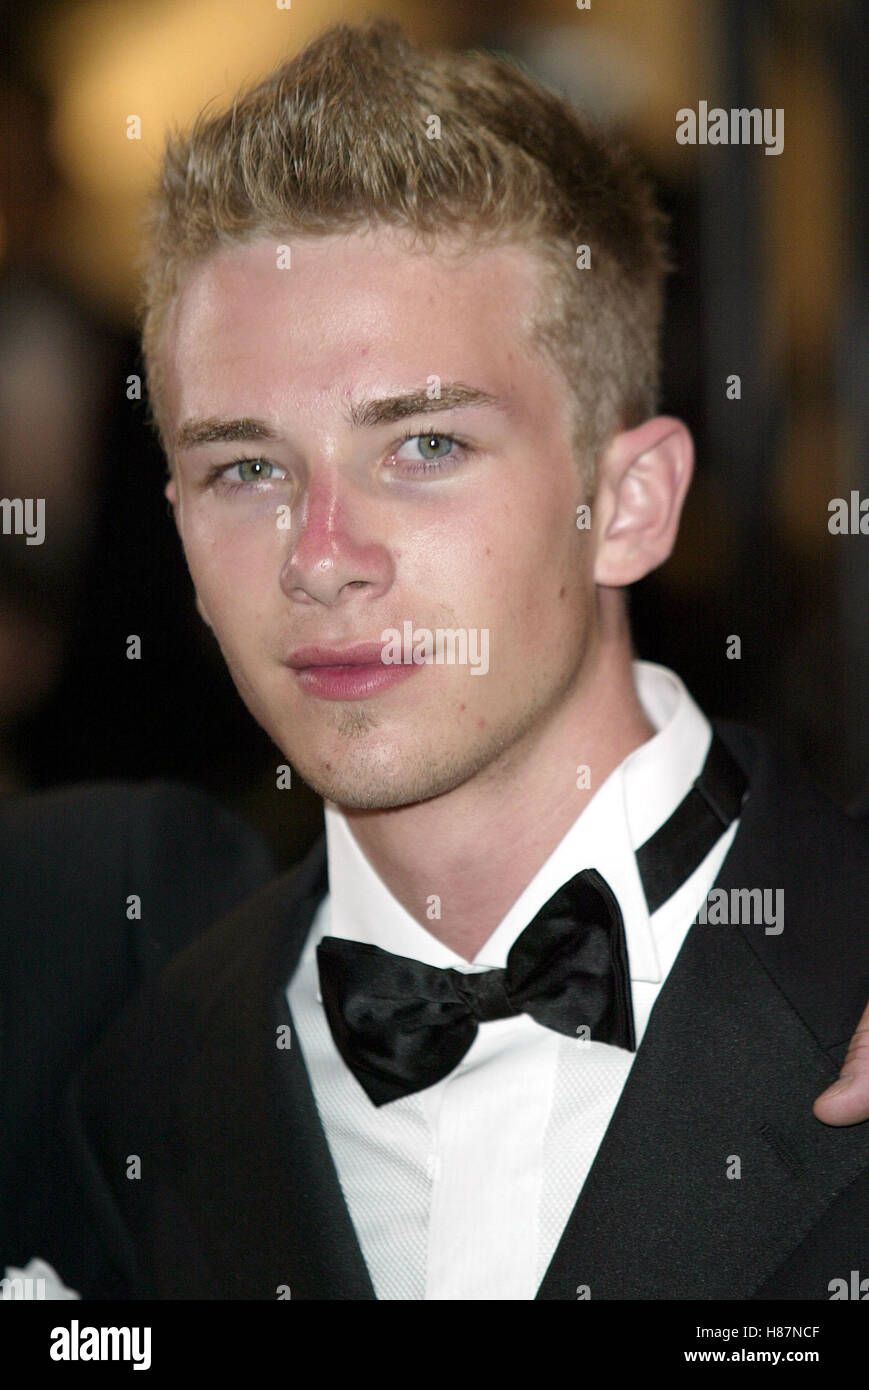 ELIAS MCCONNELL CANNES FILM FESTIVAL CANNES FRANCE 18 May 2003 Stock ...